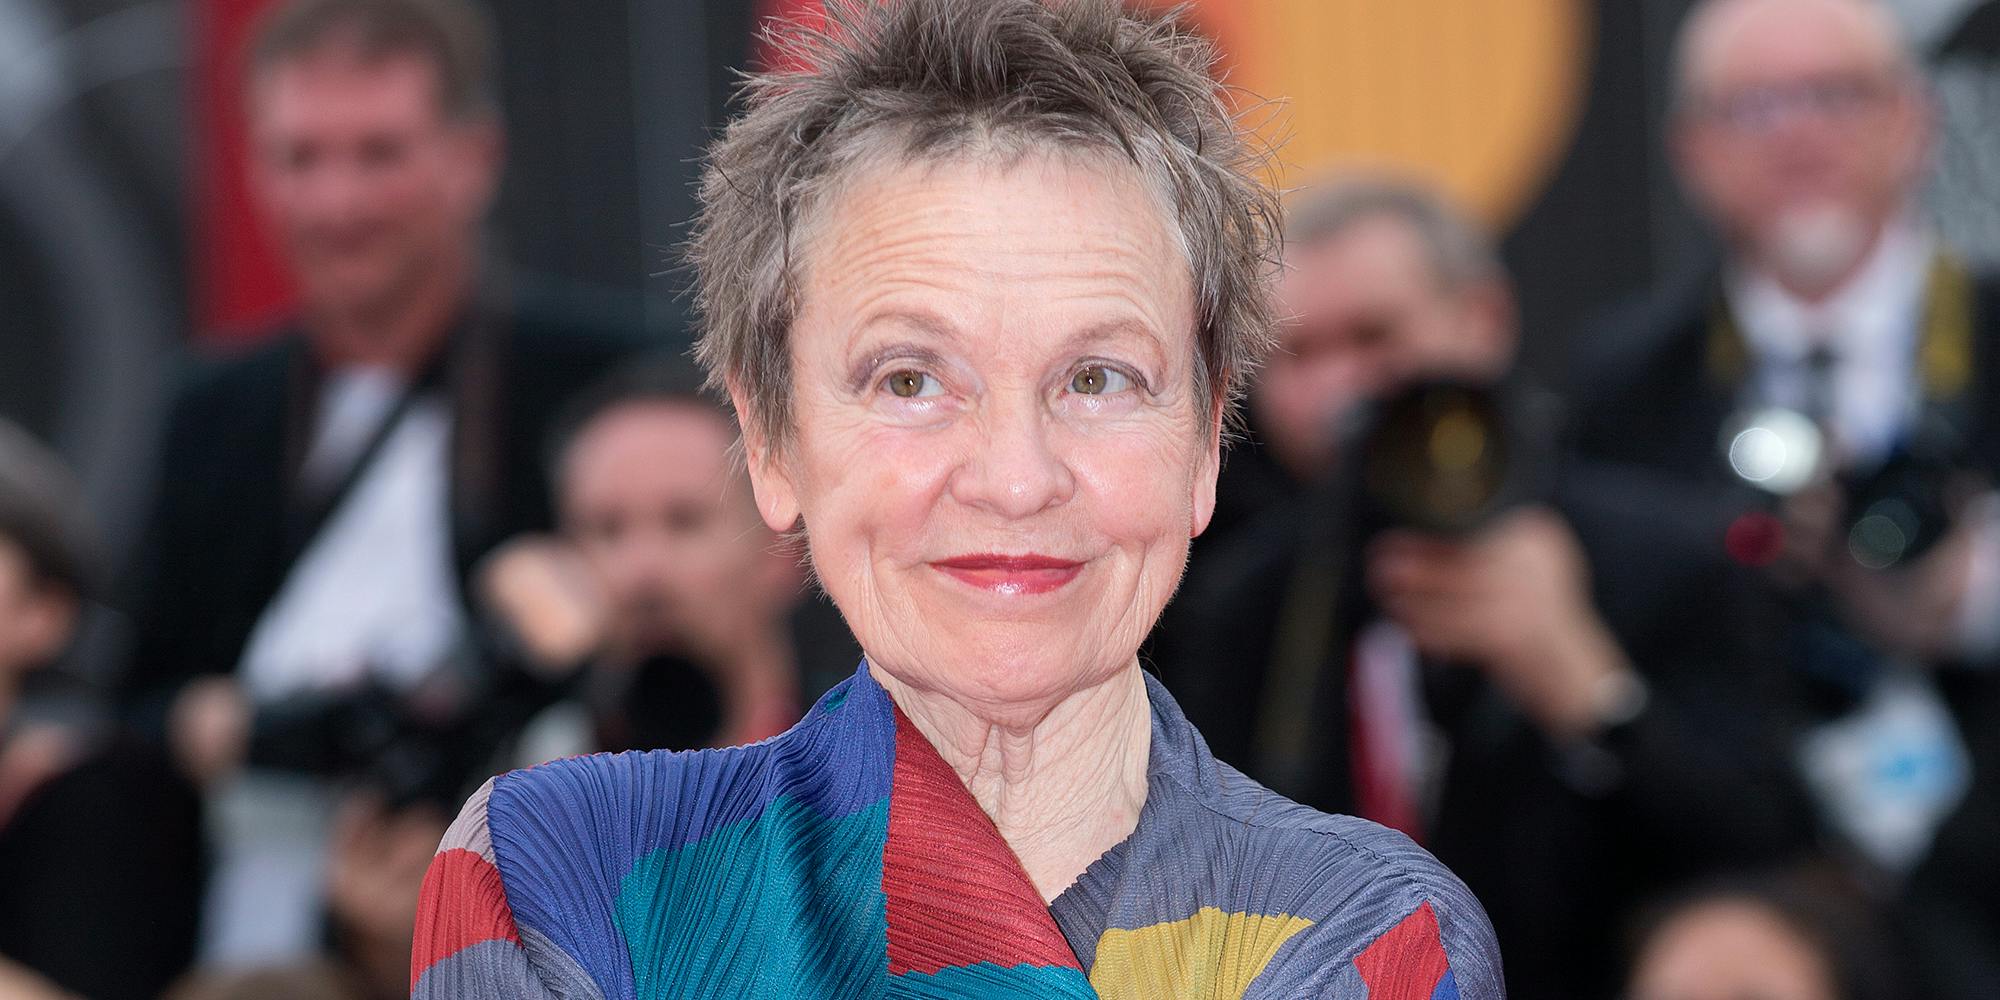 Laurie Anderson attends the red carpet of the Opening Ceremony during the 76th Venice Film Festival on August 28, 2019 in Venice, Italy.